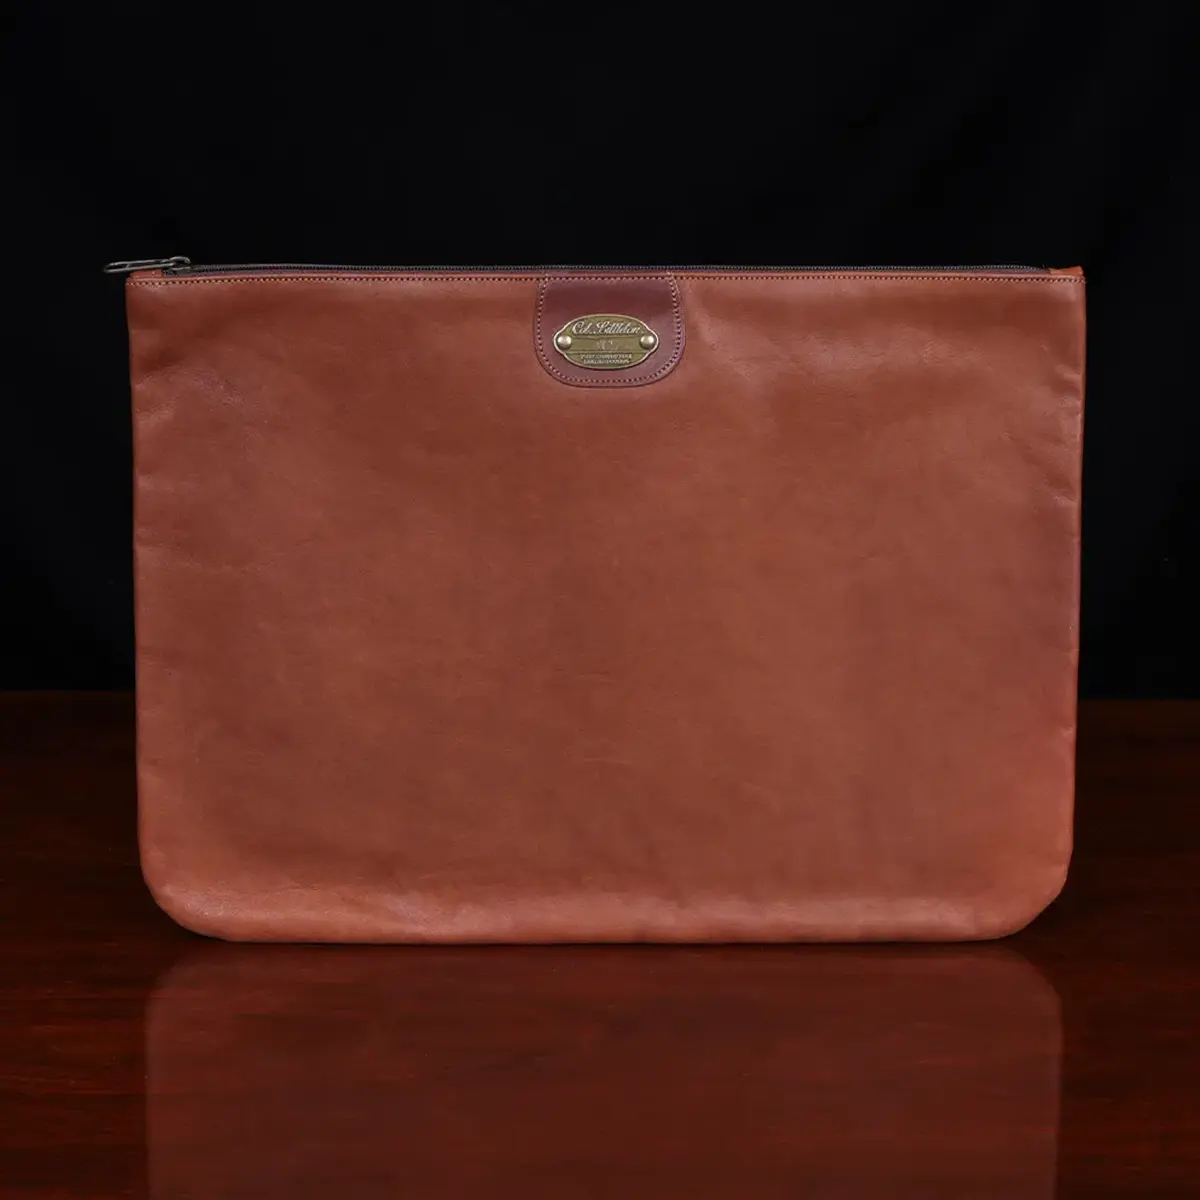 Leather Zipper Pouch - Made in USA - 9 x 5